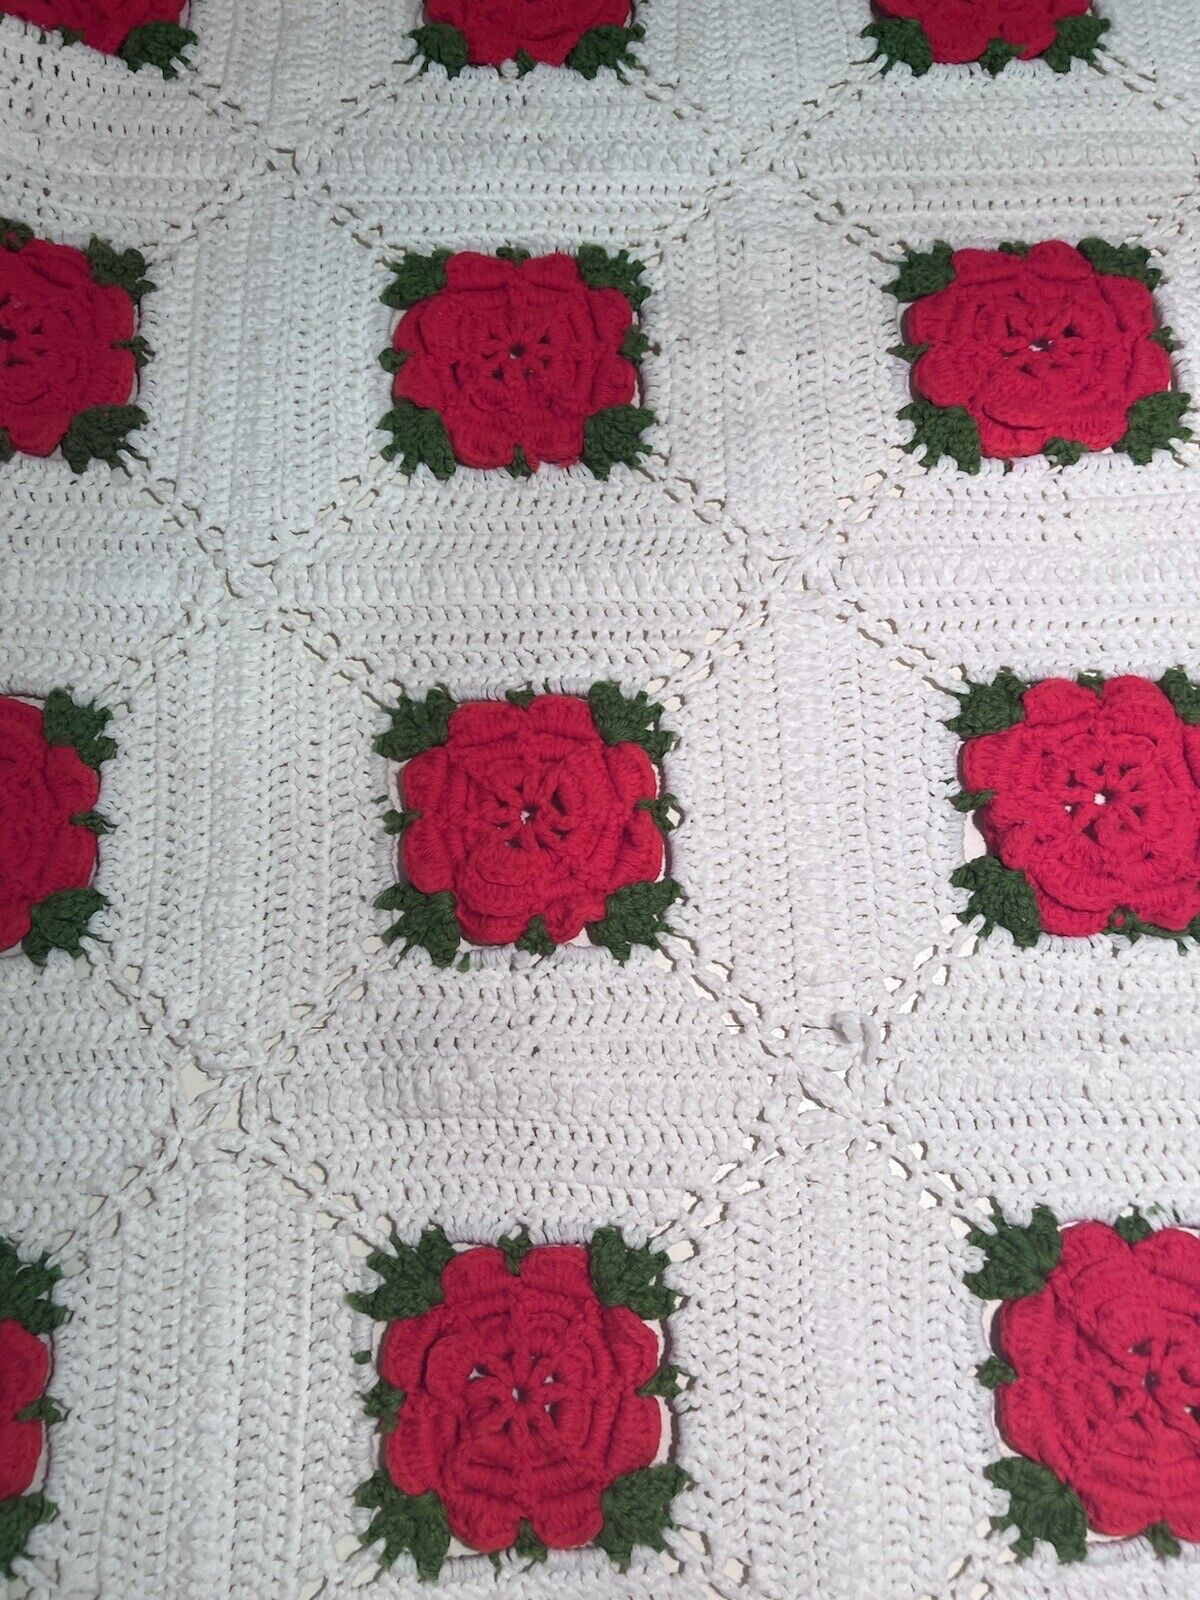 Vintage Rose Granny Square Fringed Hand Crocheted Throw. White, Red And Green 3D